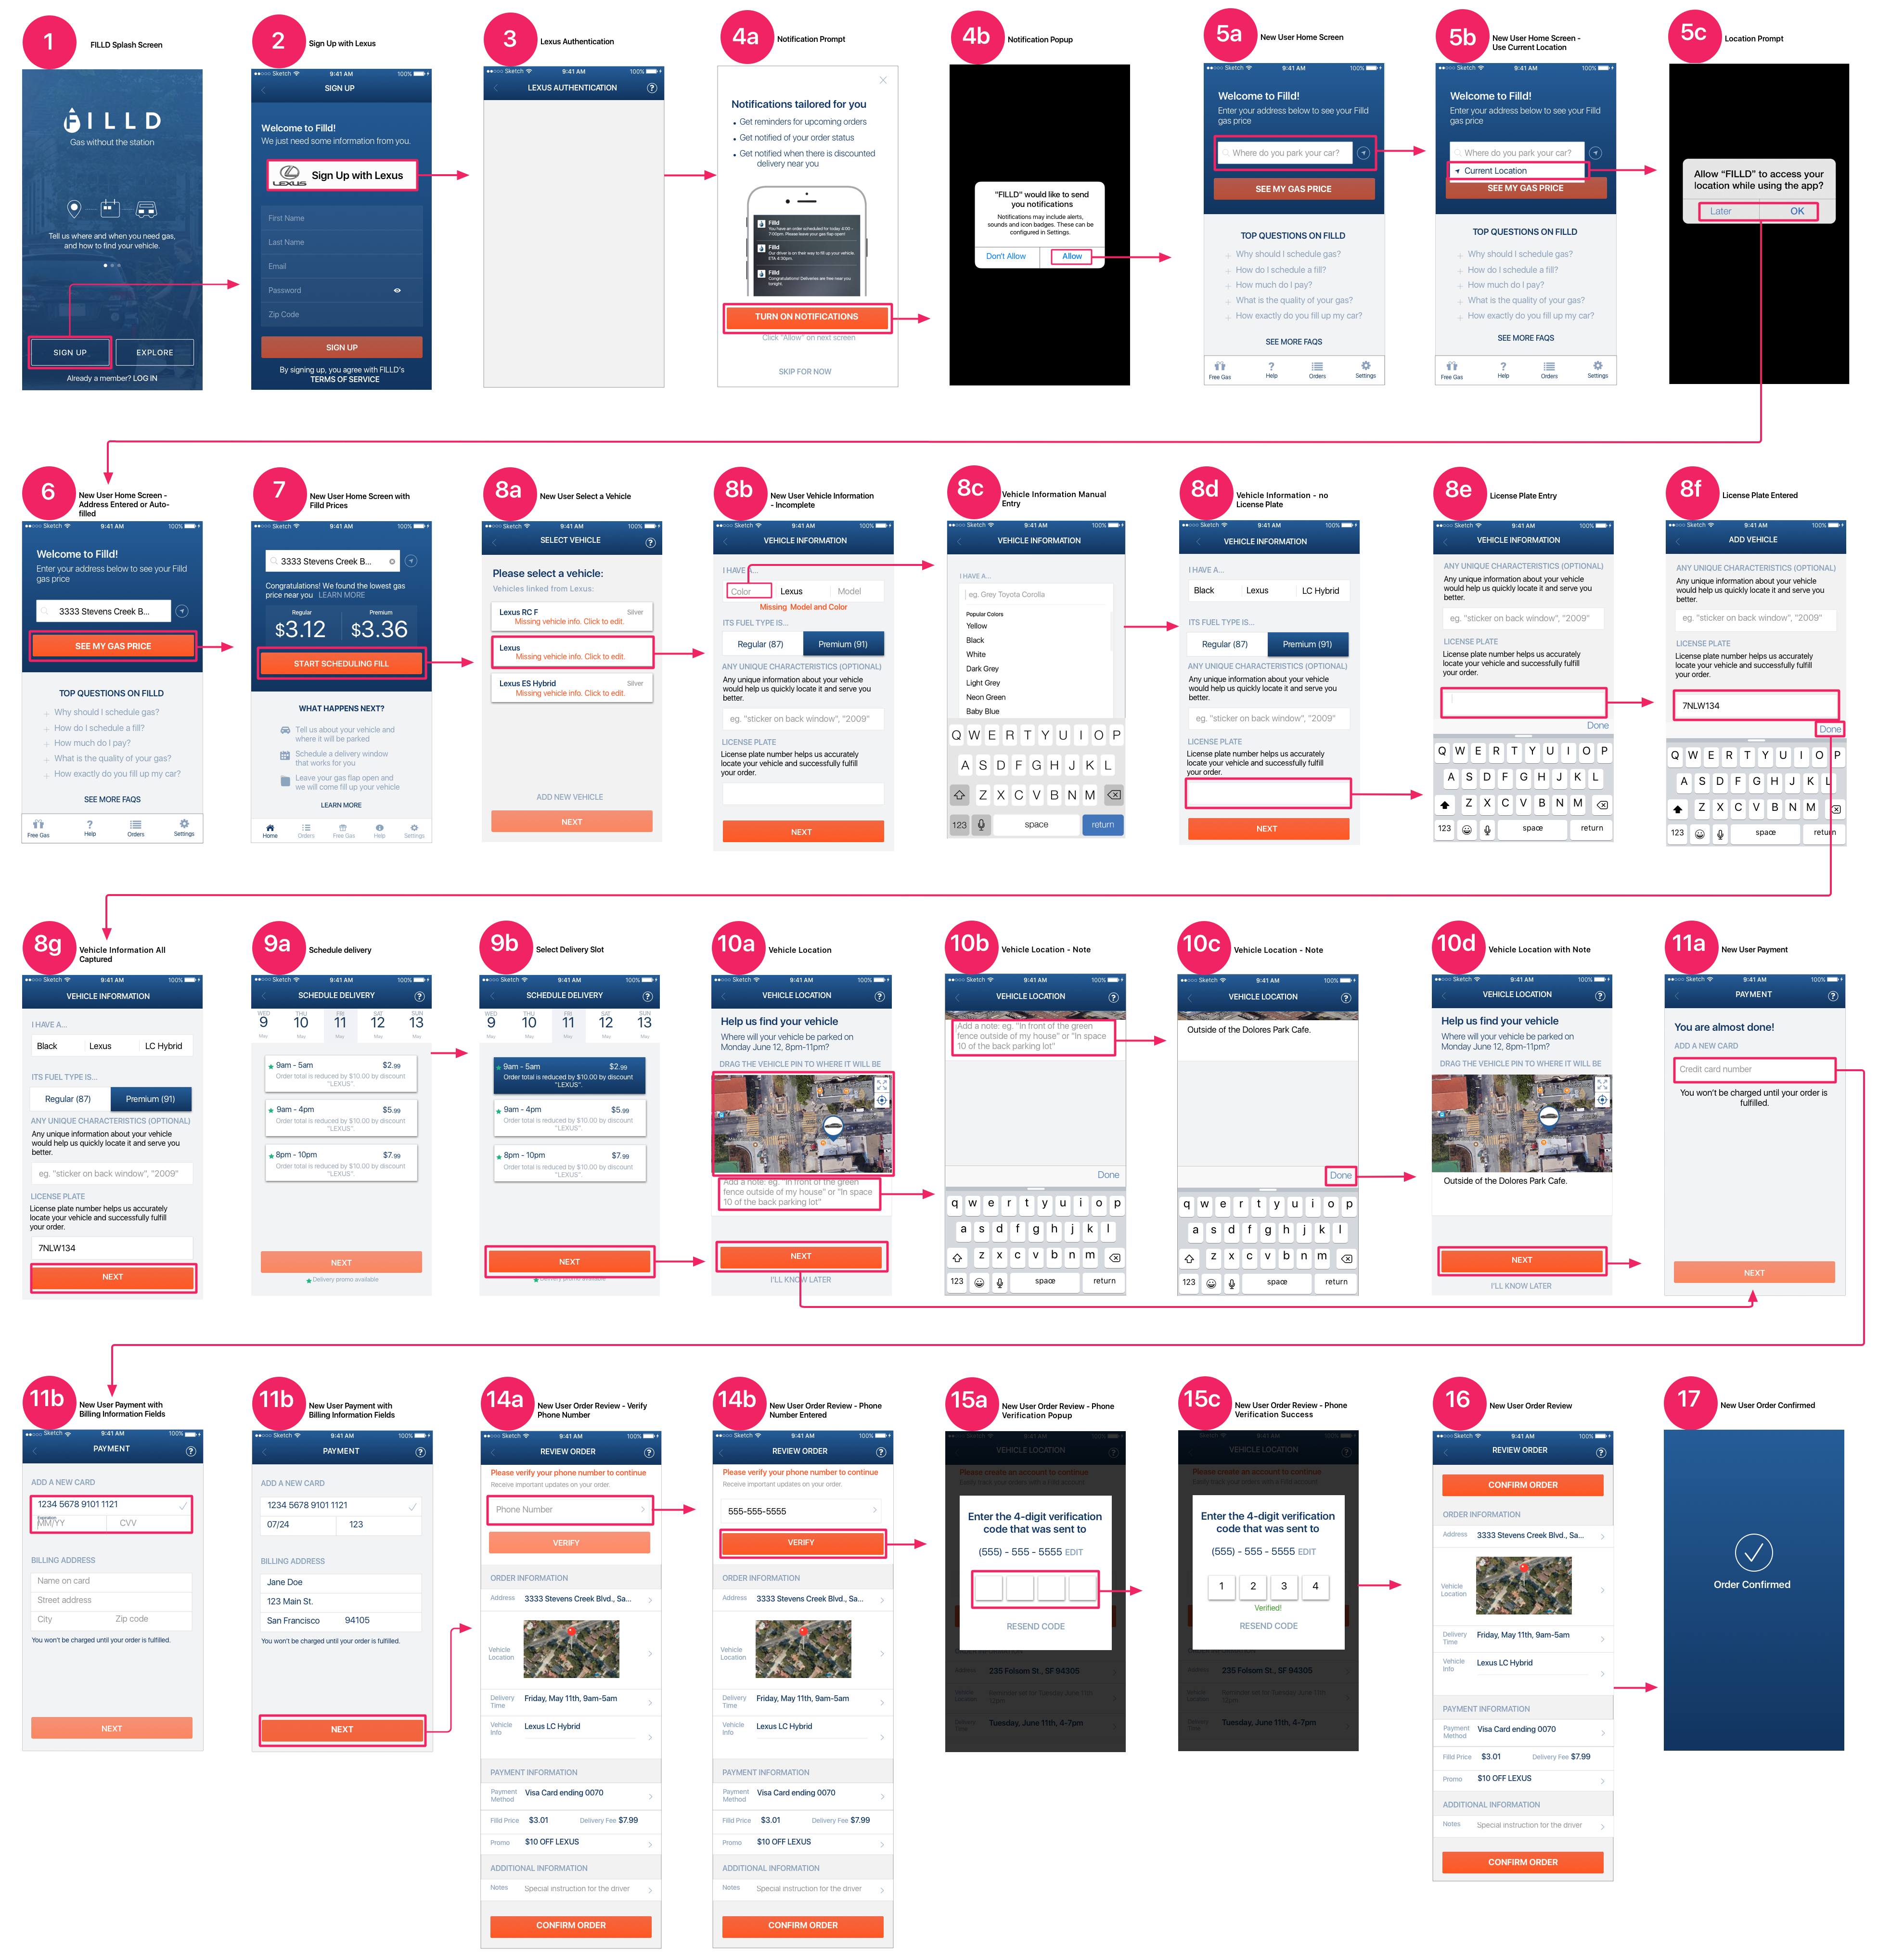 This shows the user journey from sign up through to successfully placing their first order.